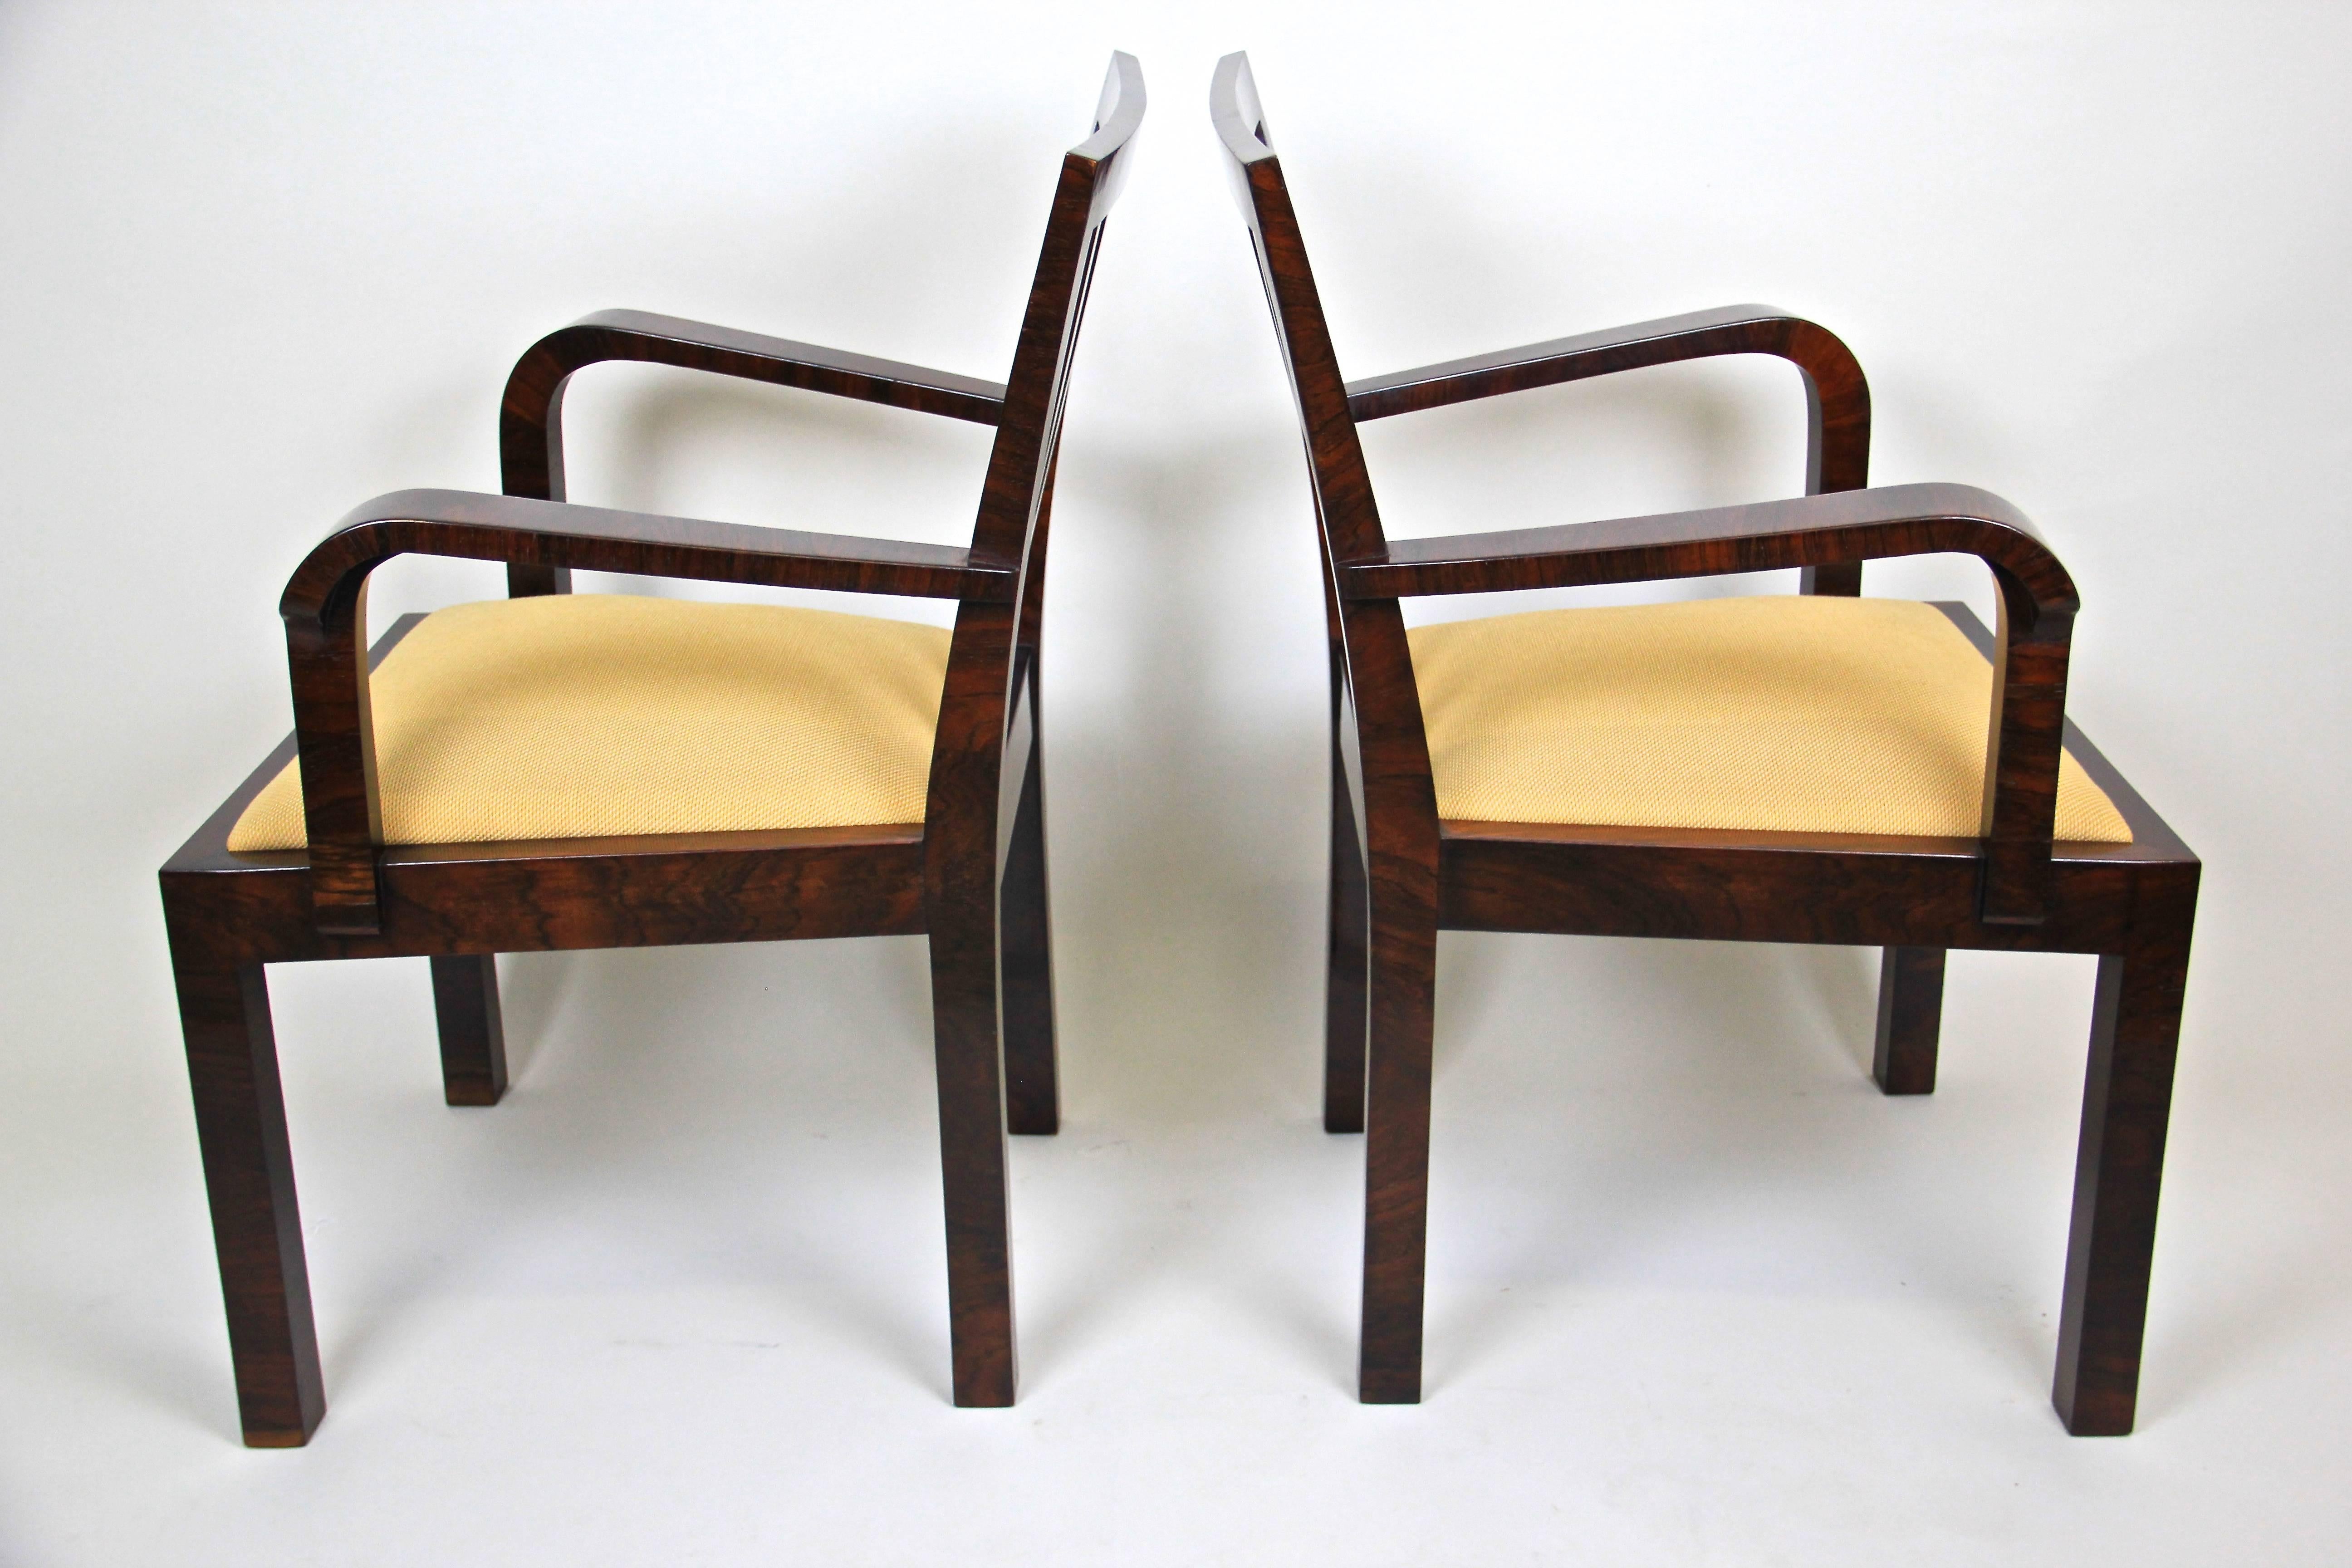 20th Century Pair of Art Deco Chairs Newly Upholstered, Austria, circa 1930